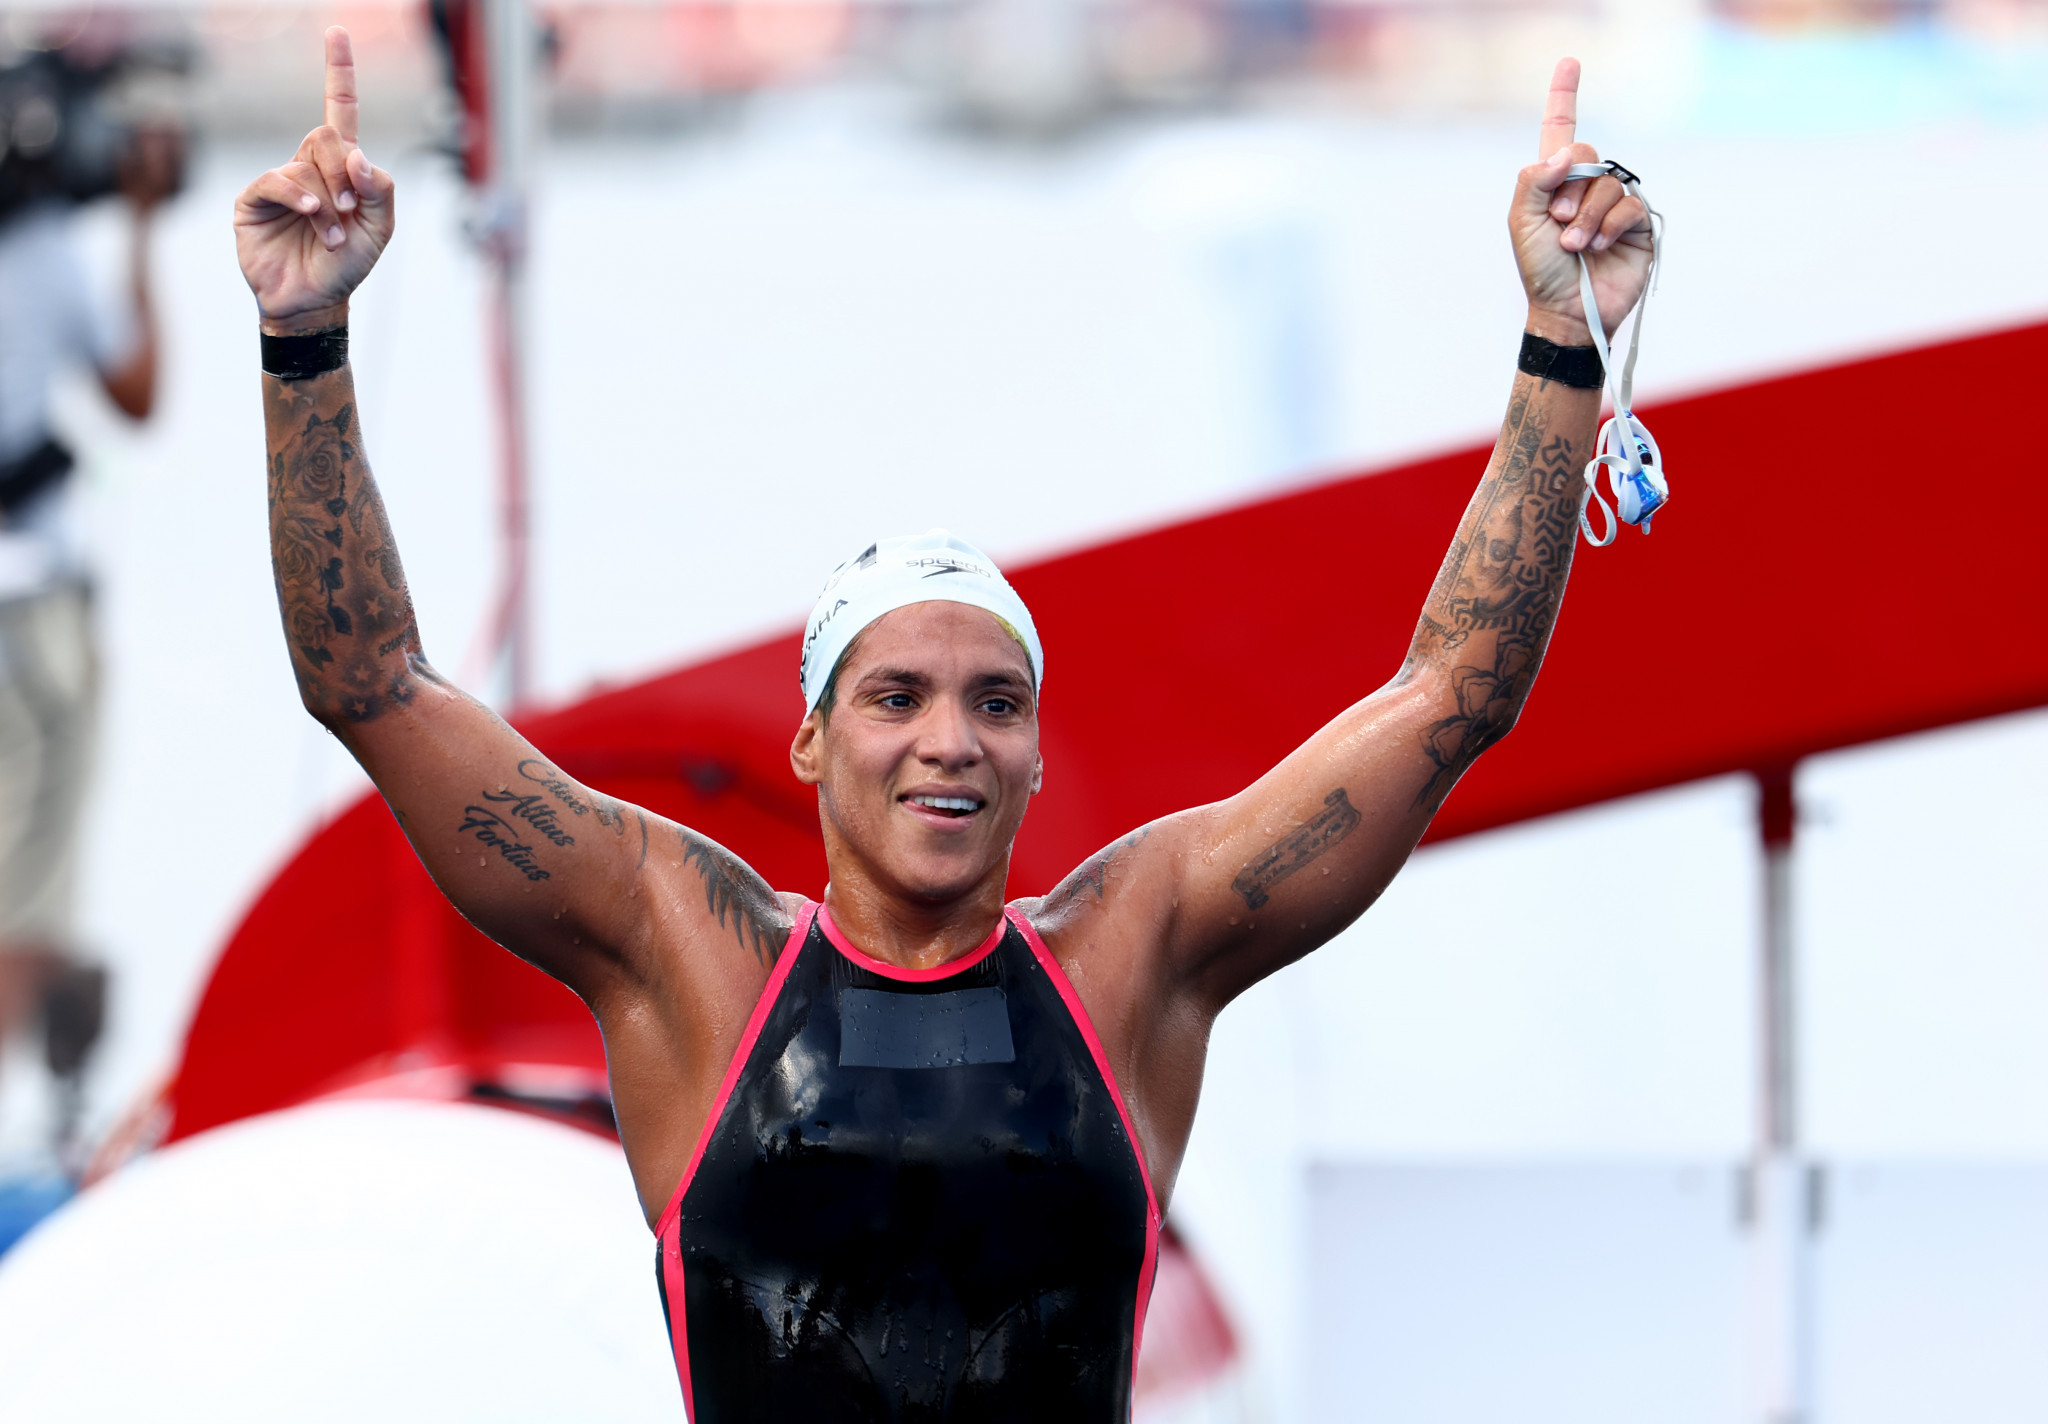 Cunha wins marathon swimming title at Tokyo 2020 to finally claim Olympic gold